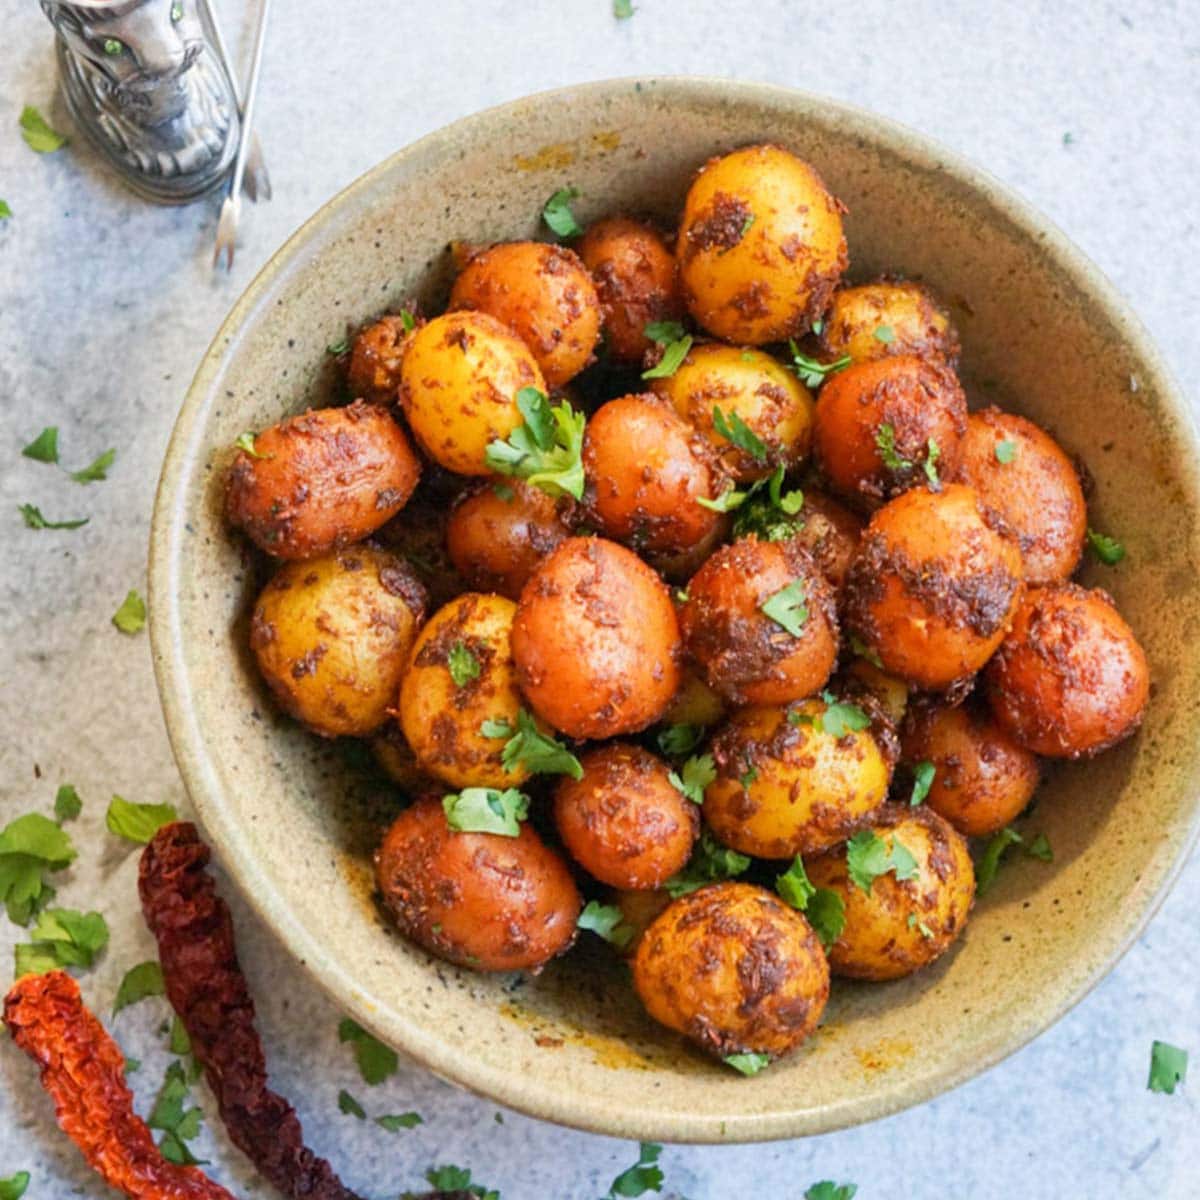 Spicy bombay potatoes in a brown bowl